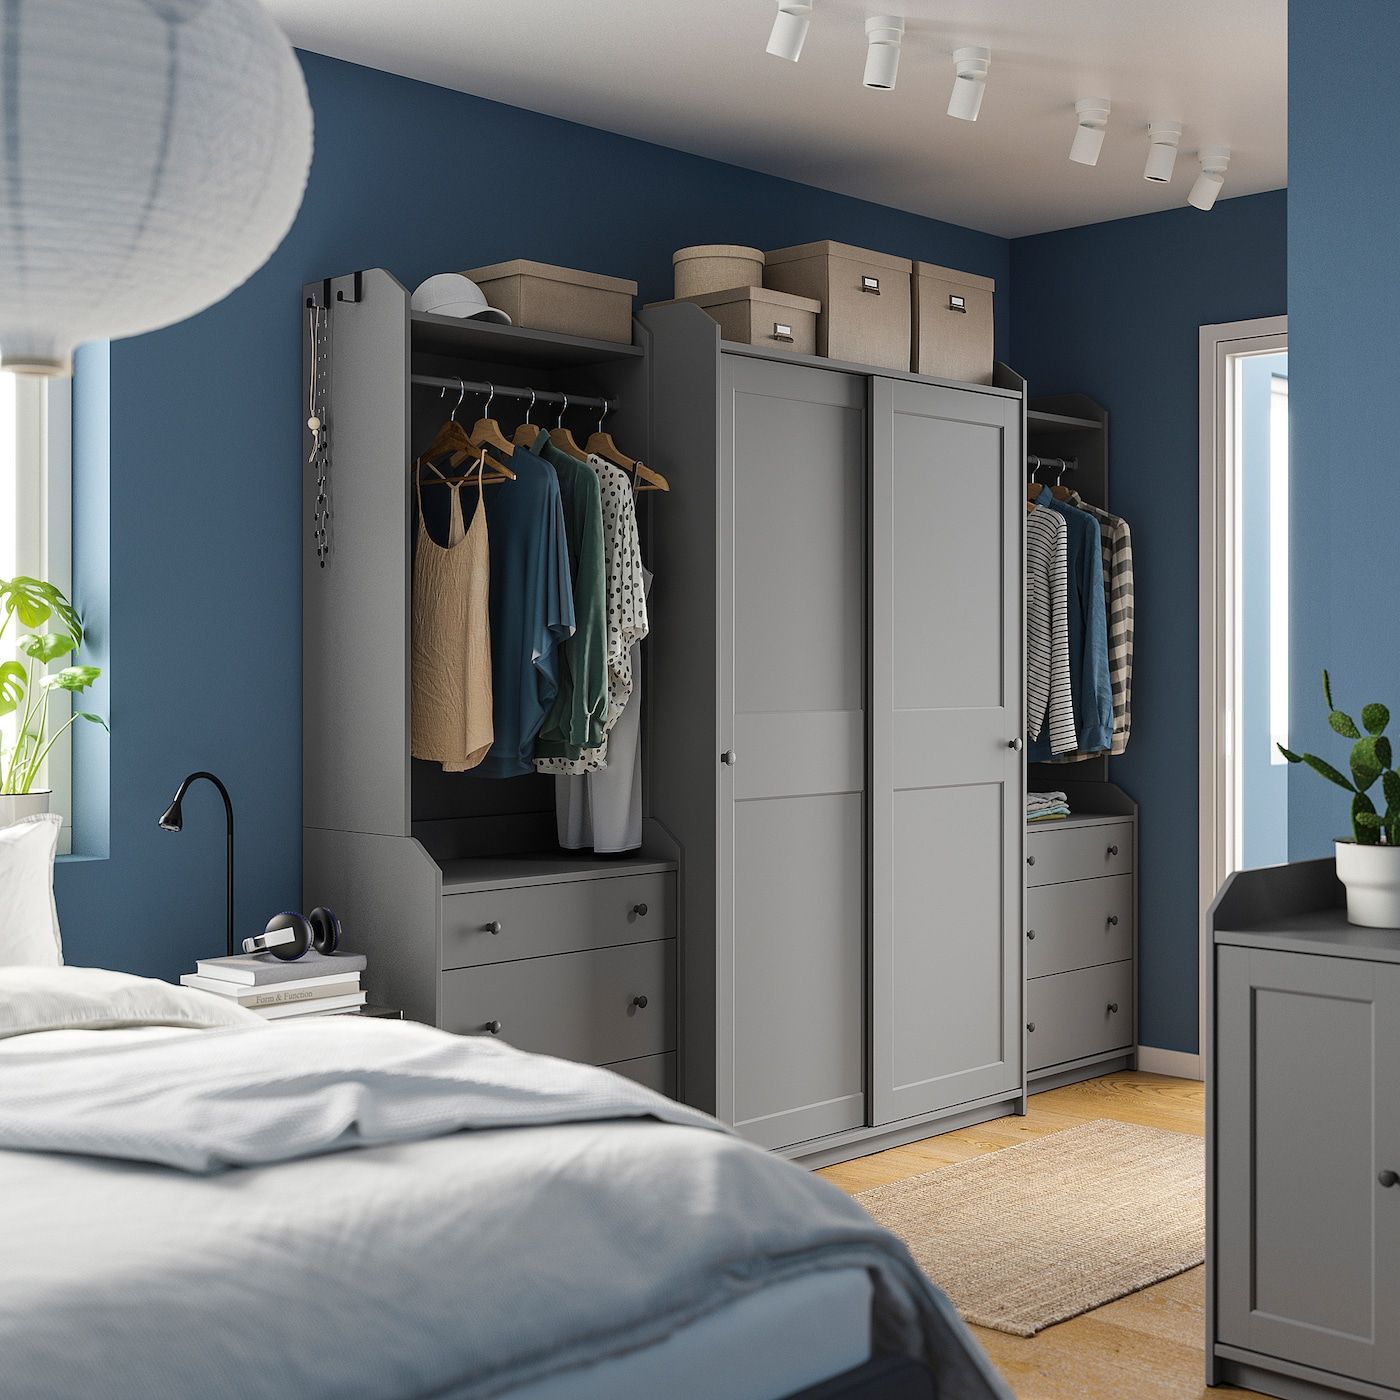 Hauga Wardrobe Combination, Grey, 258x55x199 Cm – Ikea Inside Wardrobes And Drawers Combo (View 14 of 15)